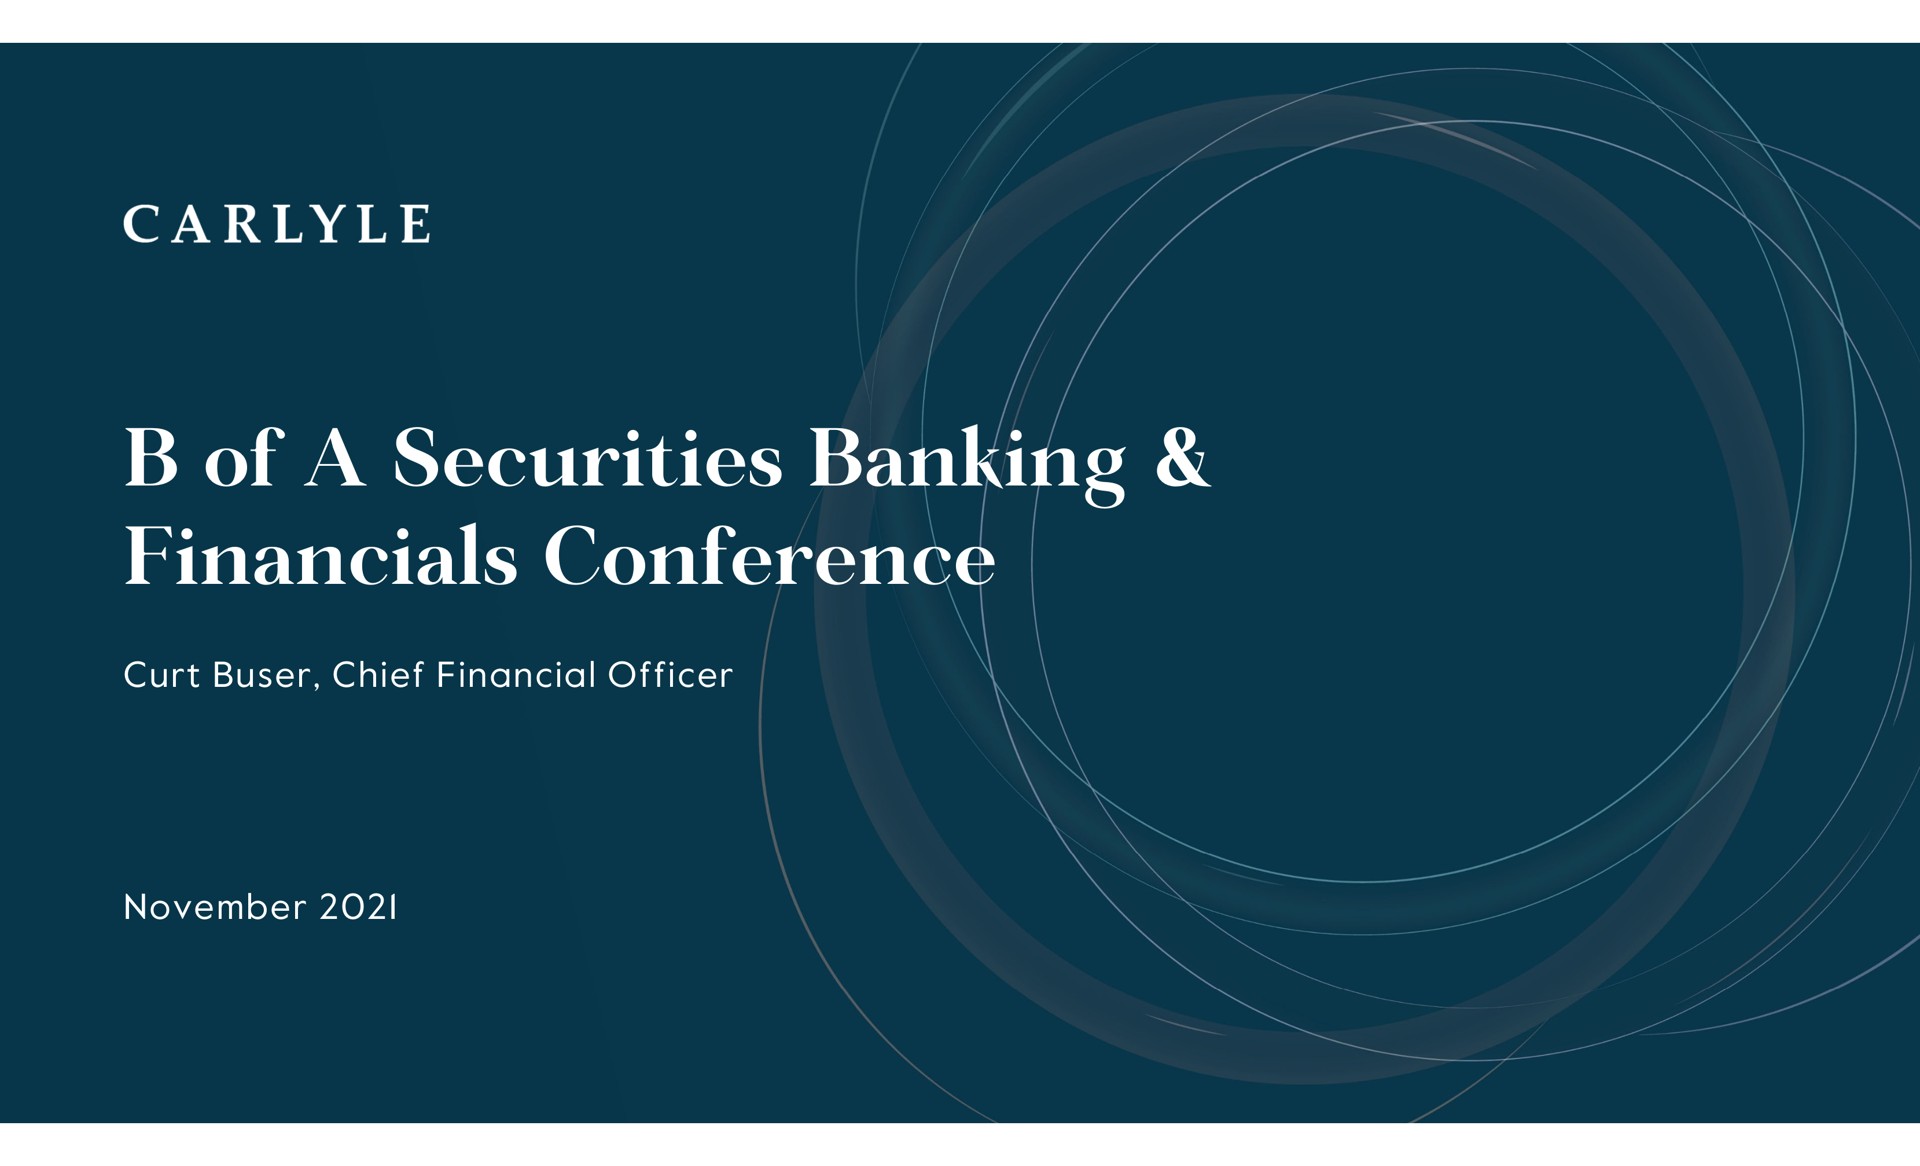 of a securities banking conference | Carlyle